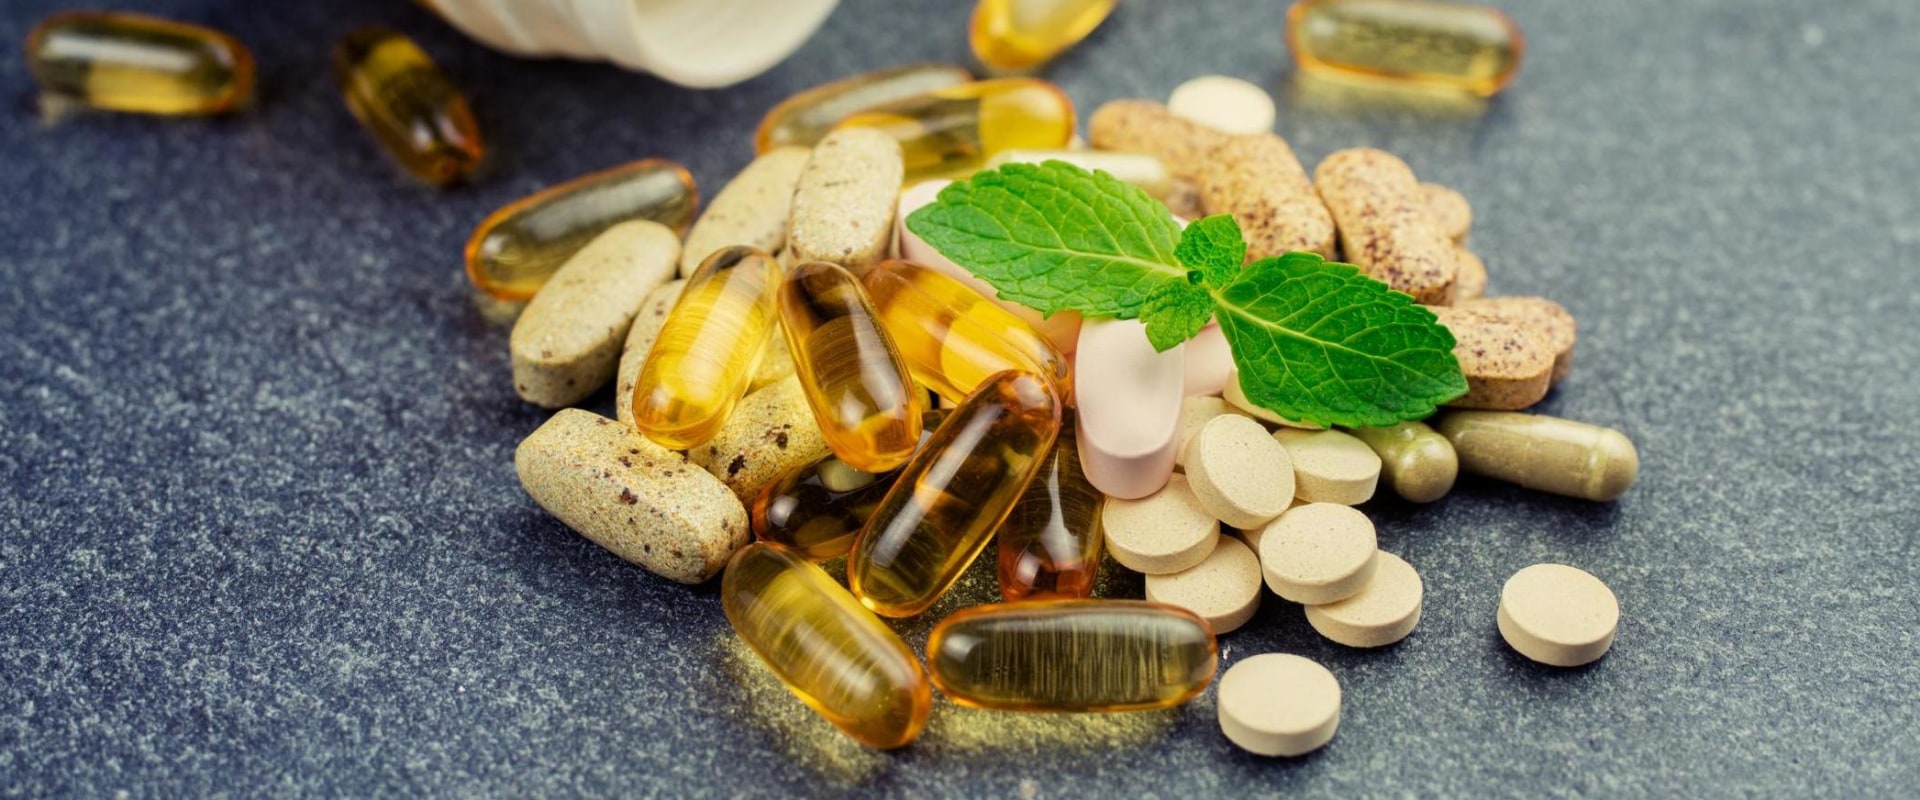 Are there supplements that are actually worth taking?